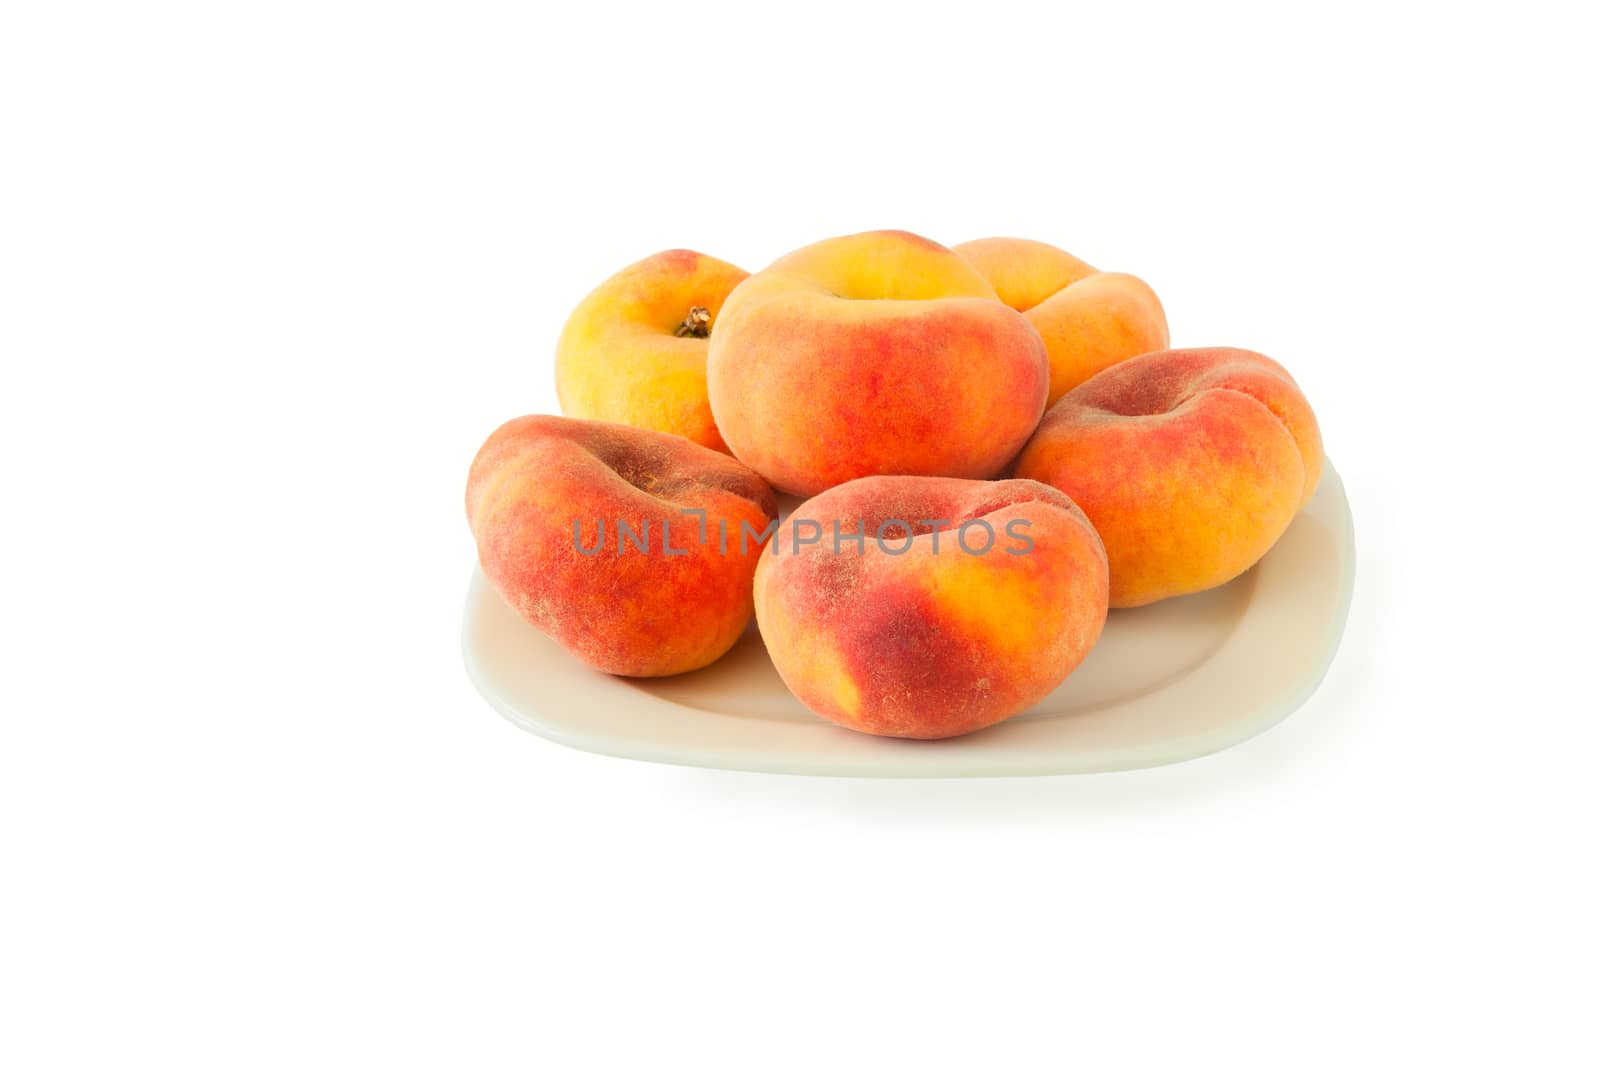 New variety of flat peaches lies on a white plate against a white background